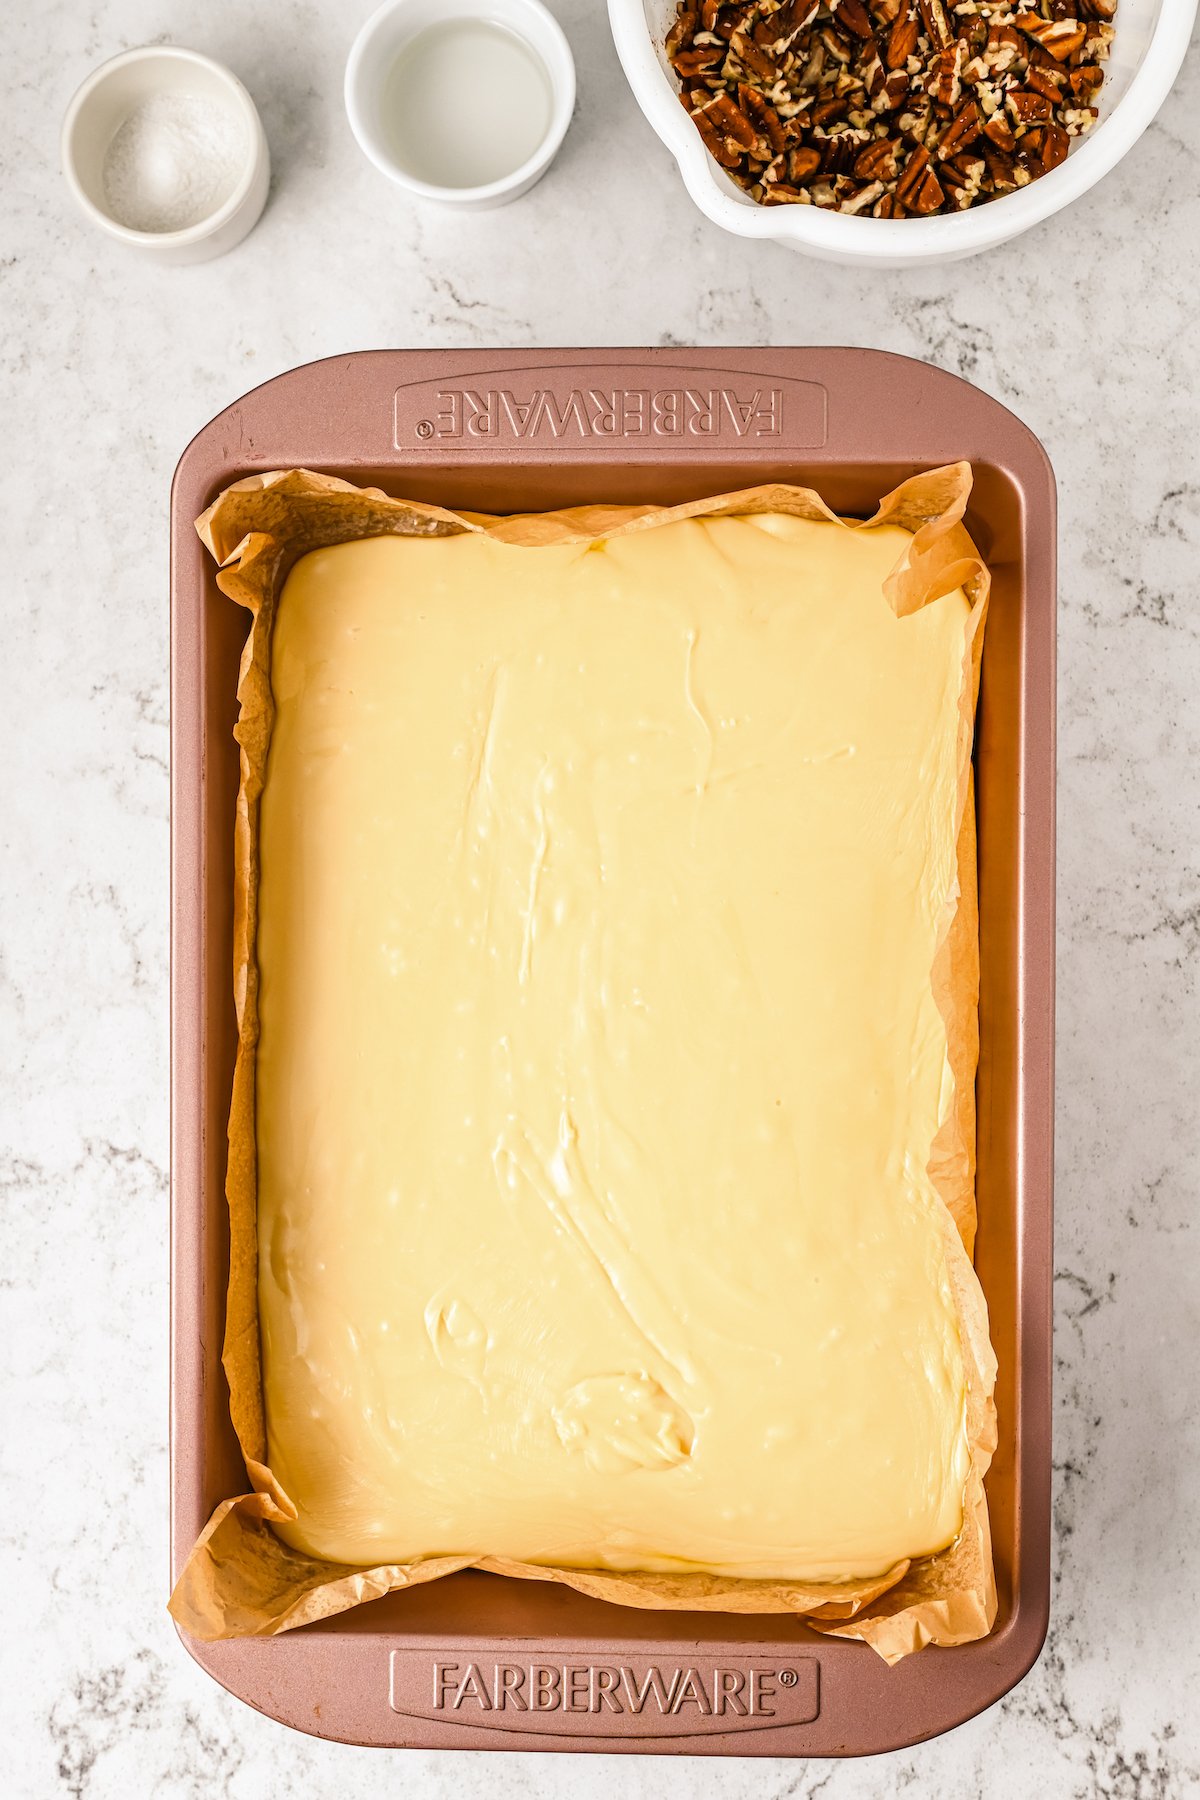 A white chocolate candy mixture poured into a parchment-lined pan.